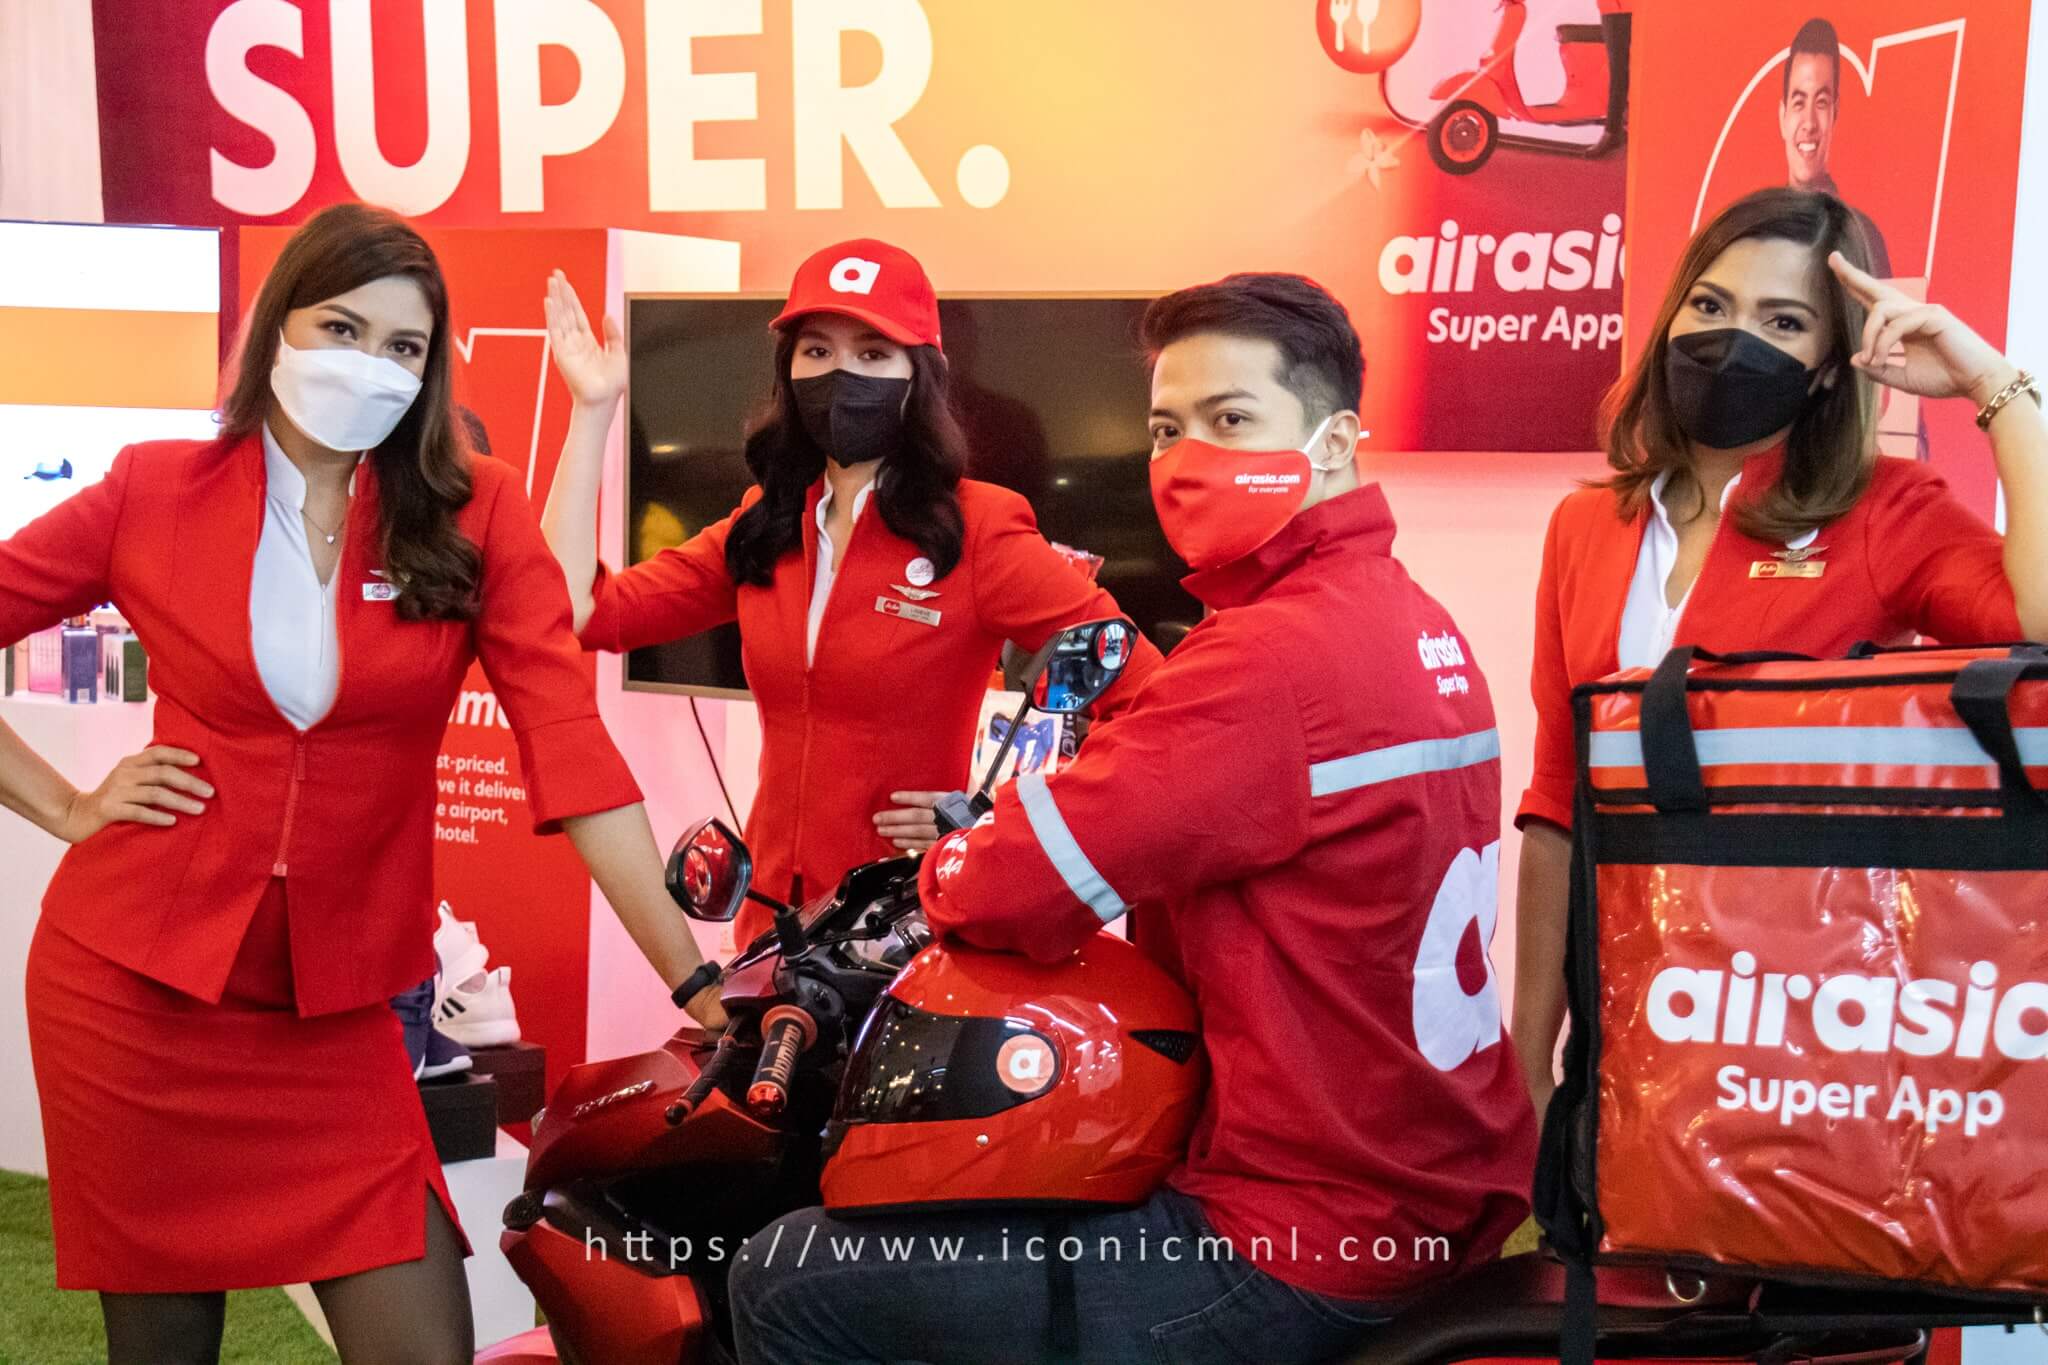 airasia Super App officially launched in PH